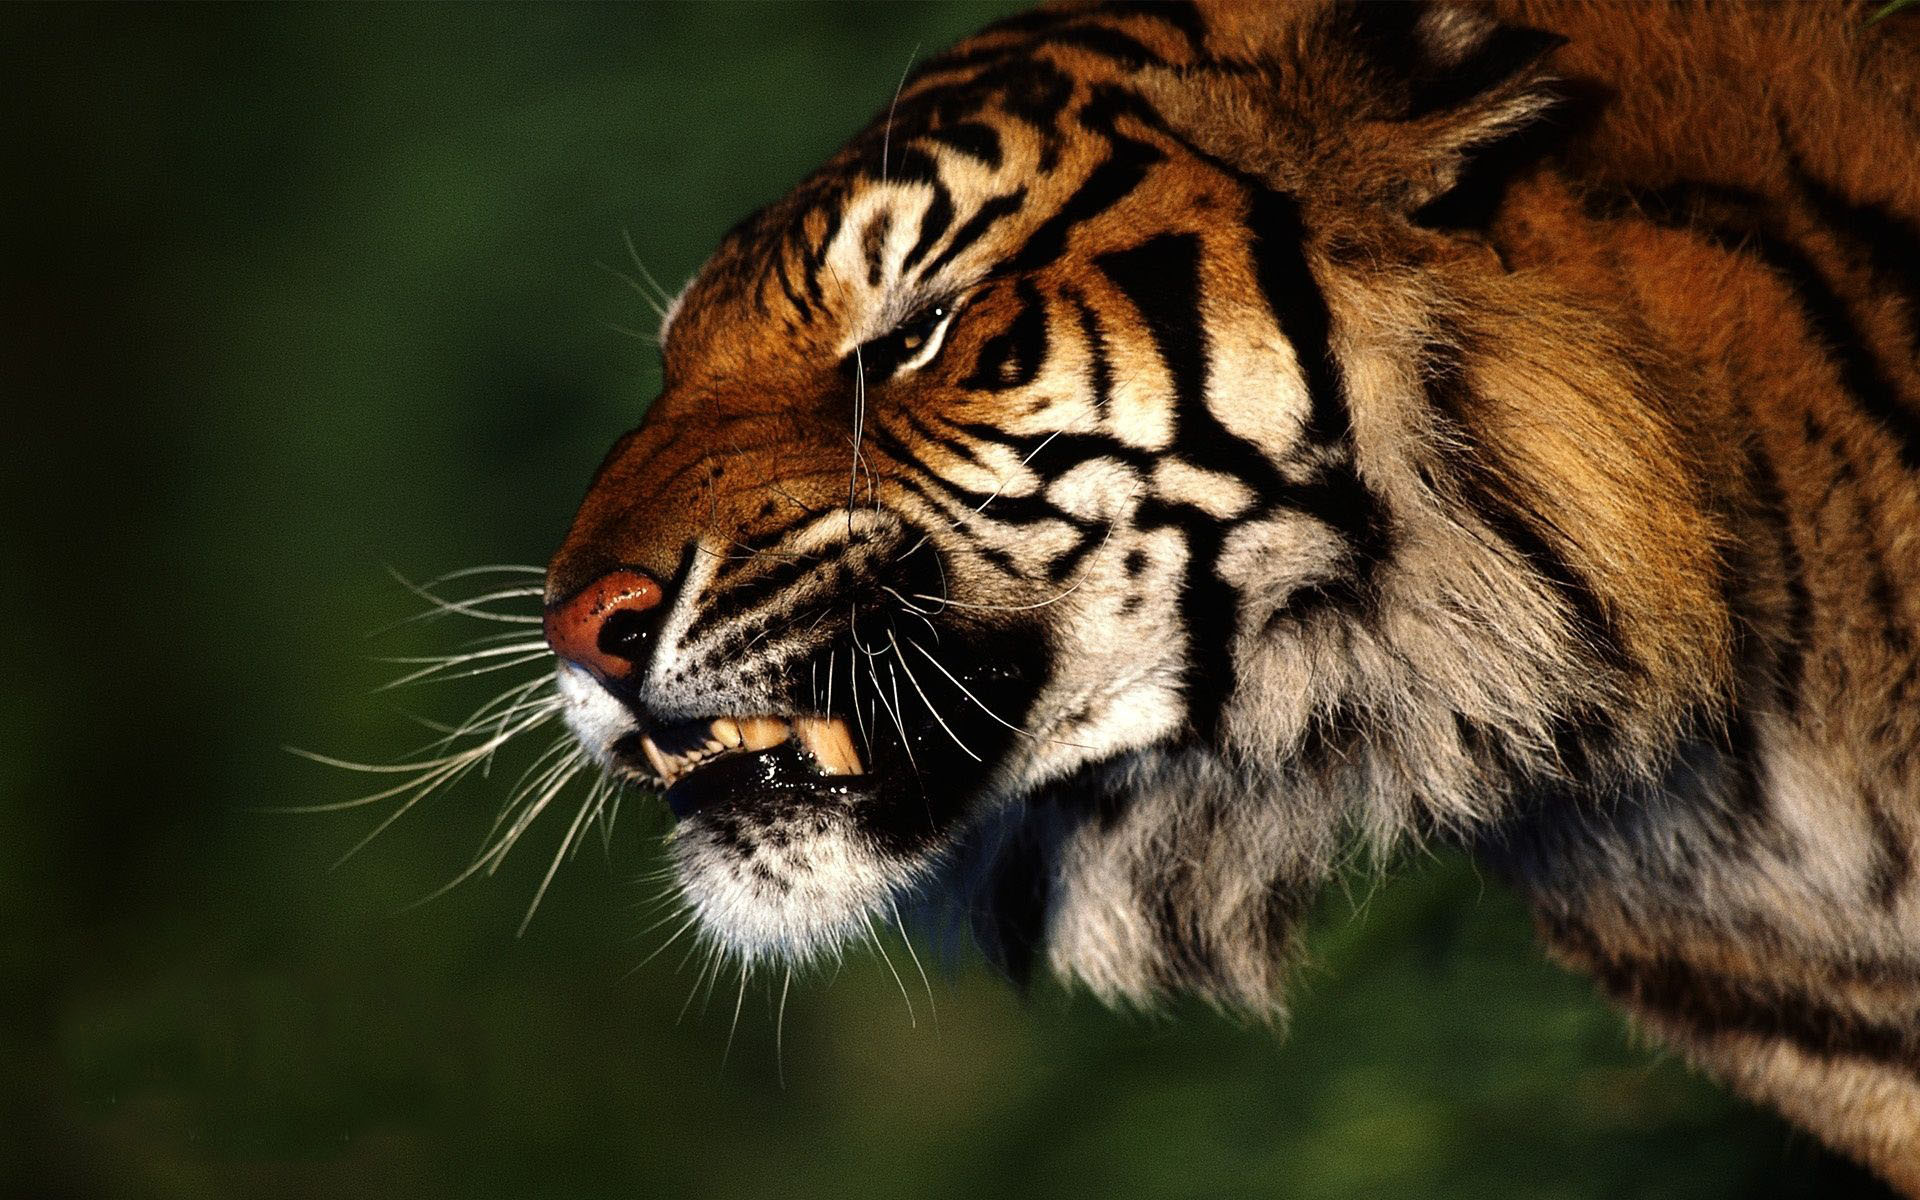 Related Image Beautiful Tigers Photos - Tiger Angry - HD Wallpaper 